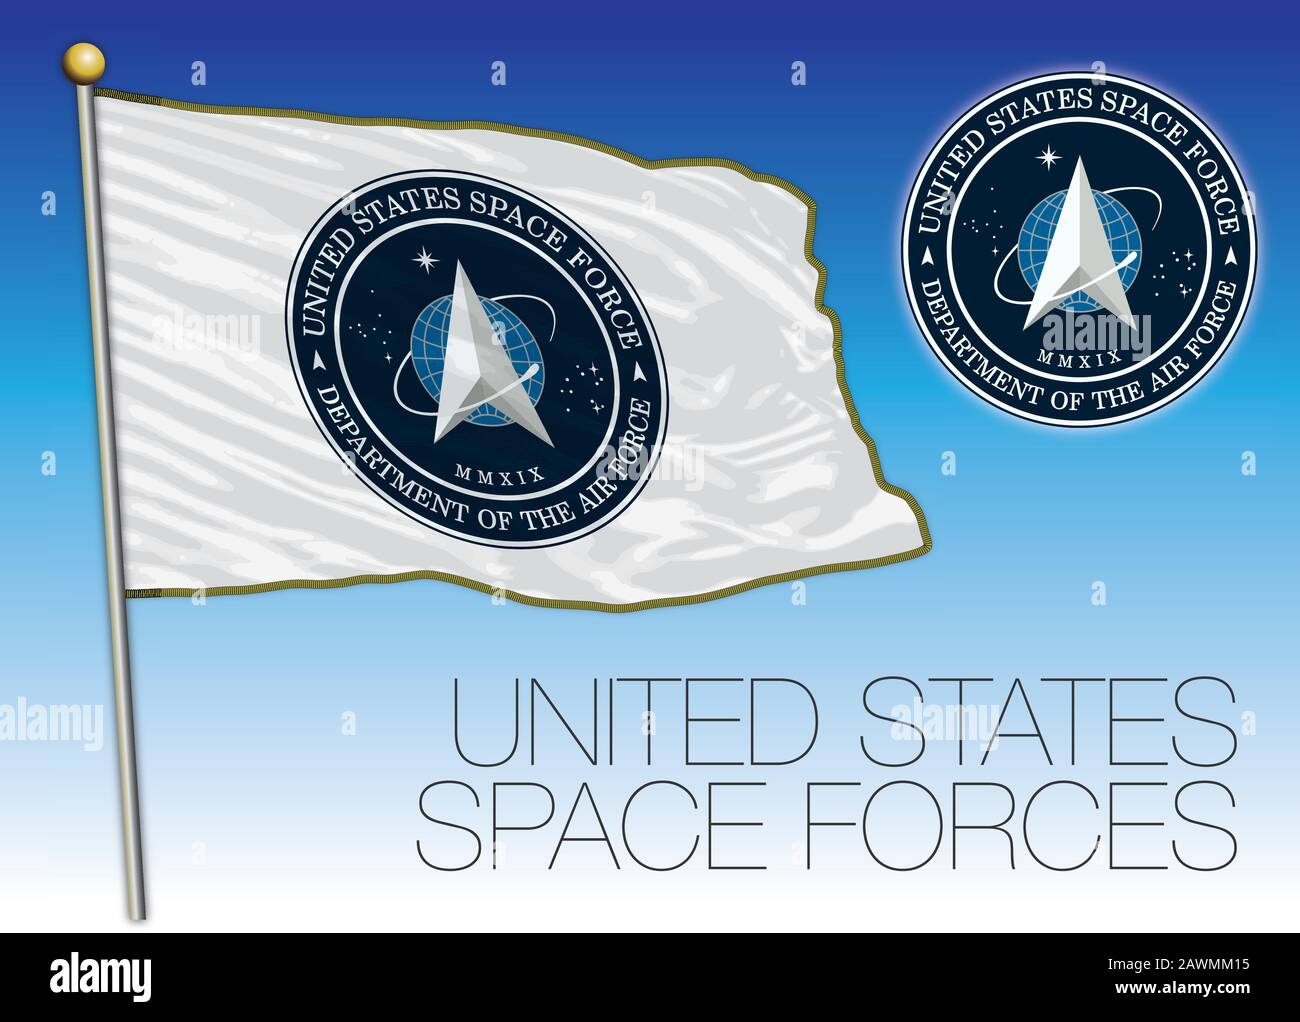 United States Space Force flag and seal, USA, vector illustration Stock Vector